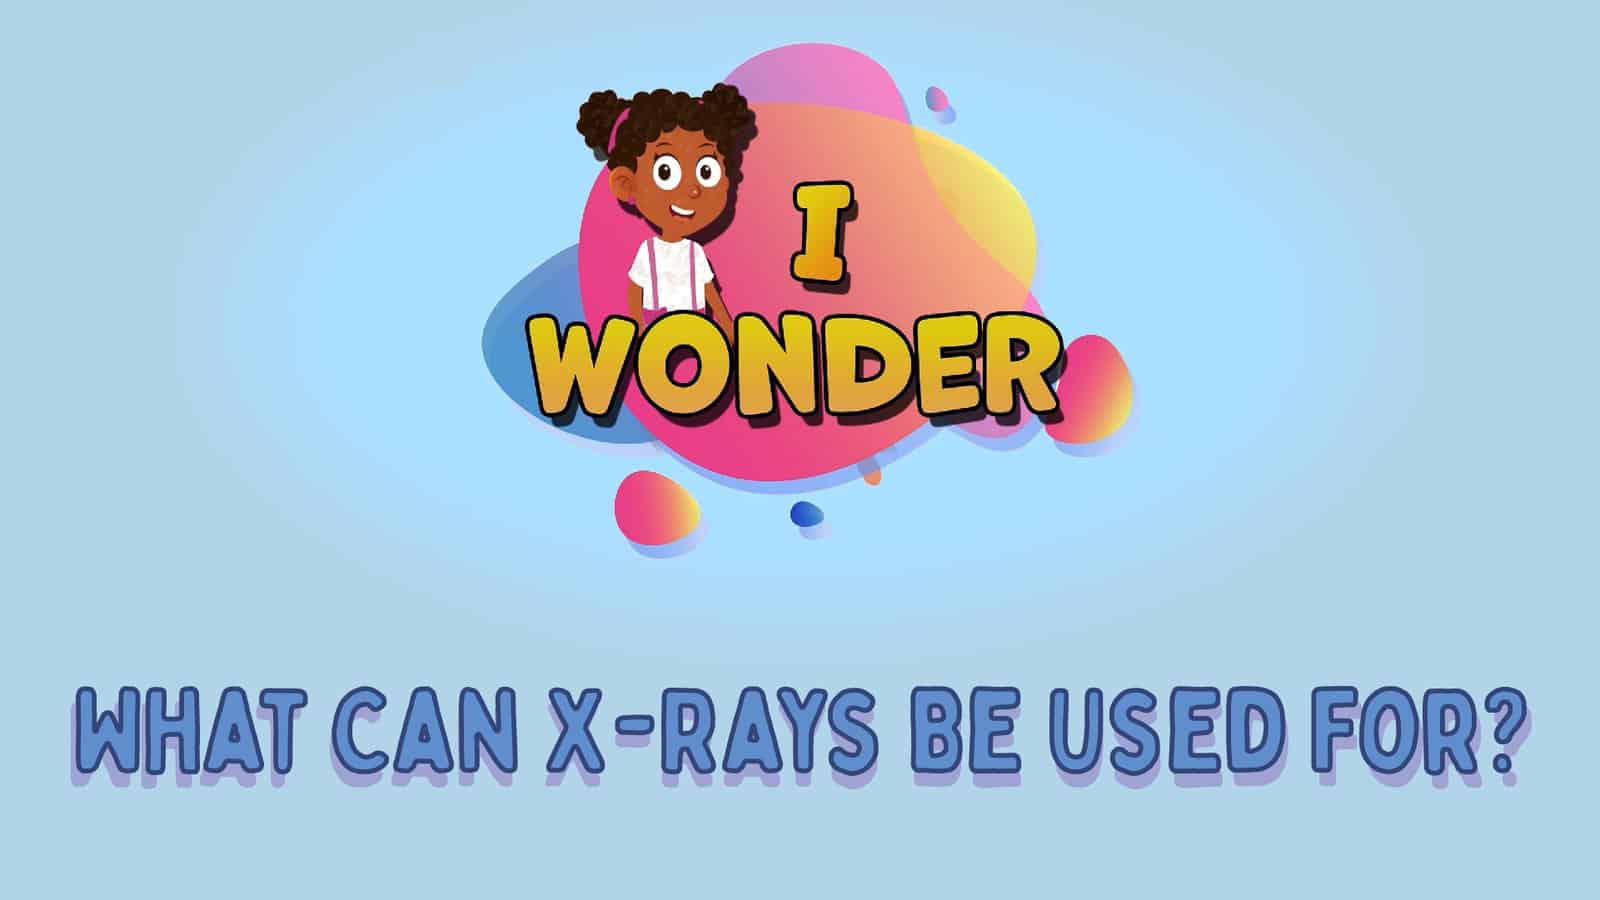 X-Rays Be Used For LearningMole